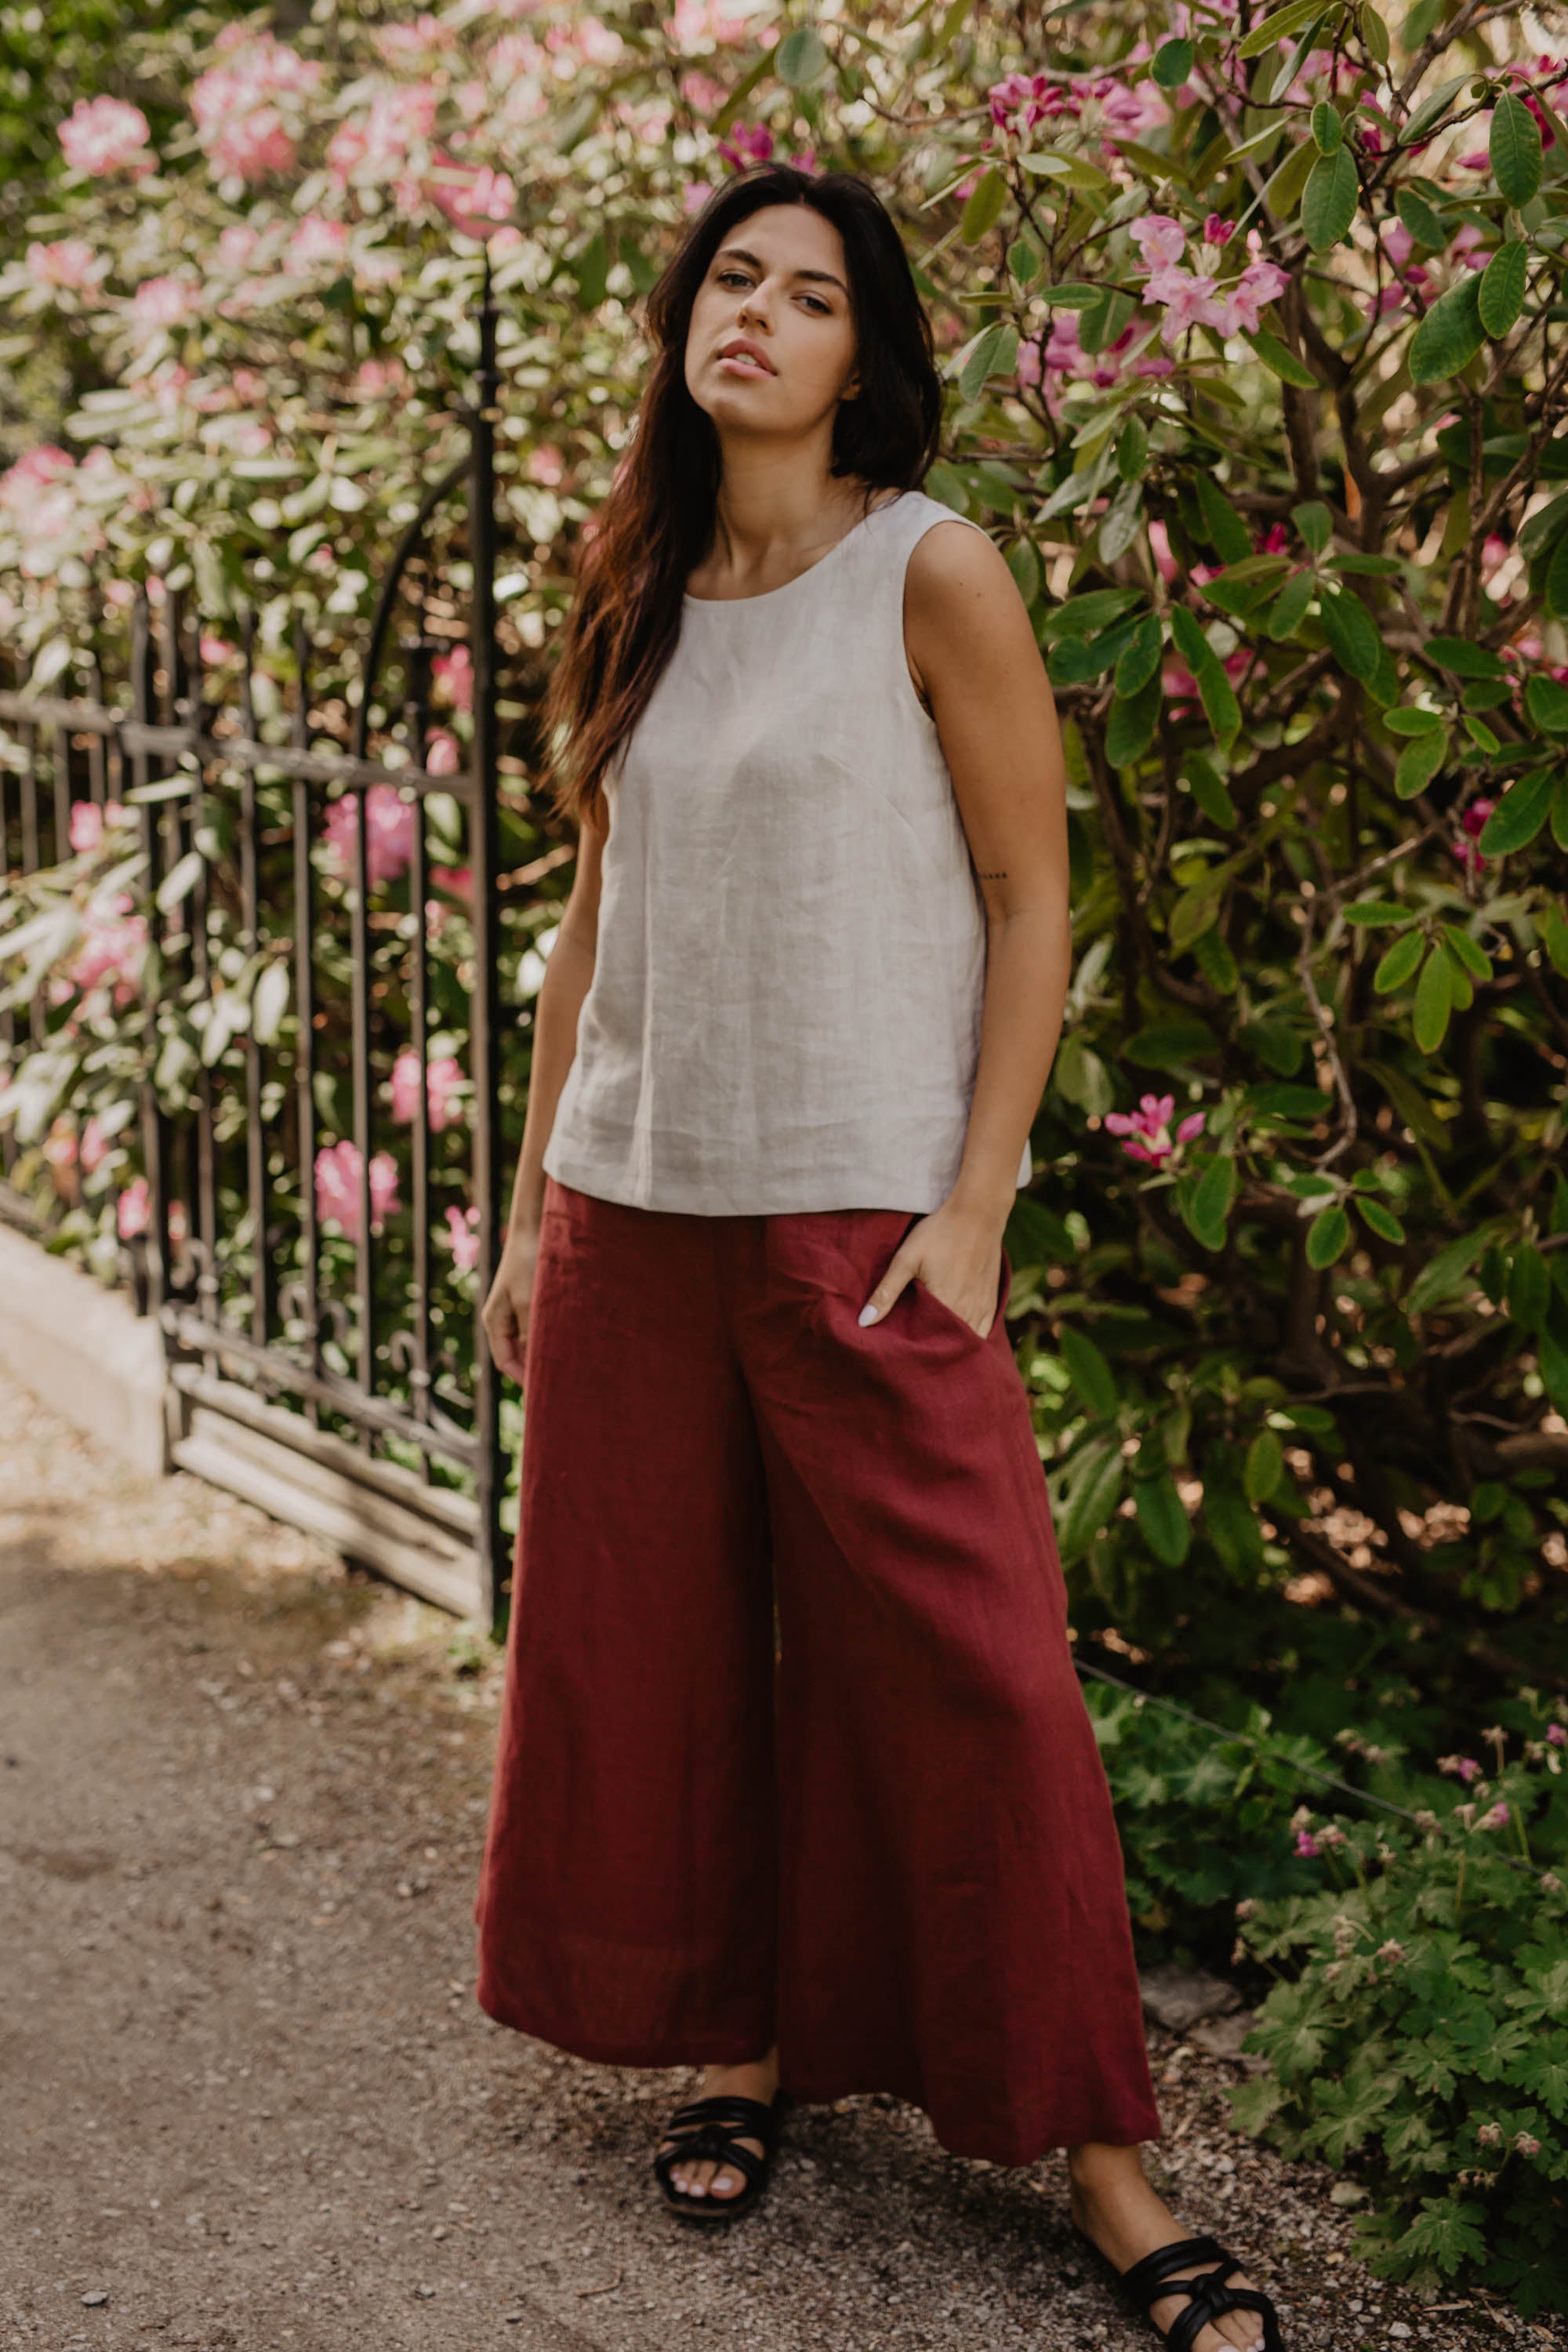 Woman With White Linen Top And Red Linen Pants Posing In Flowery Garden